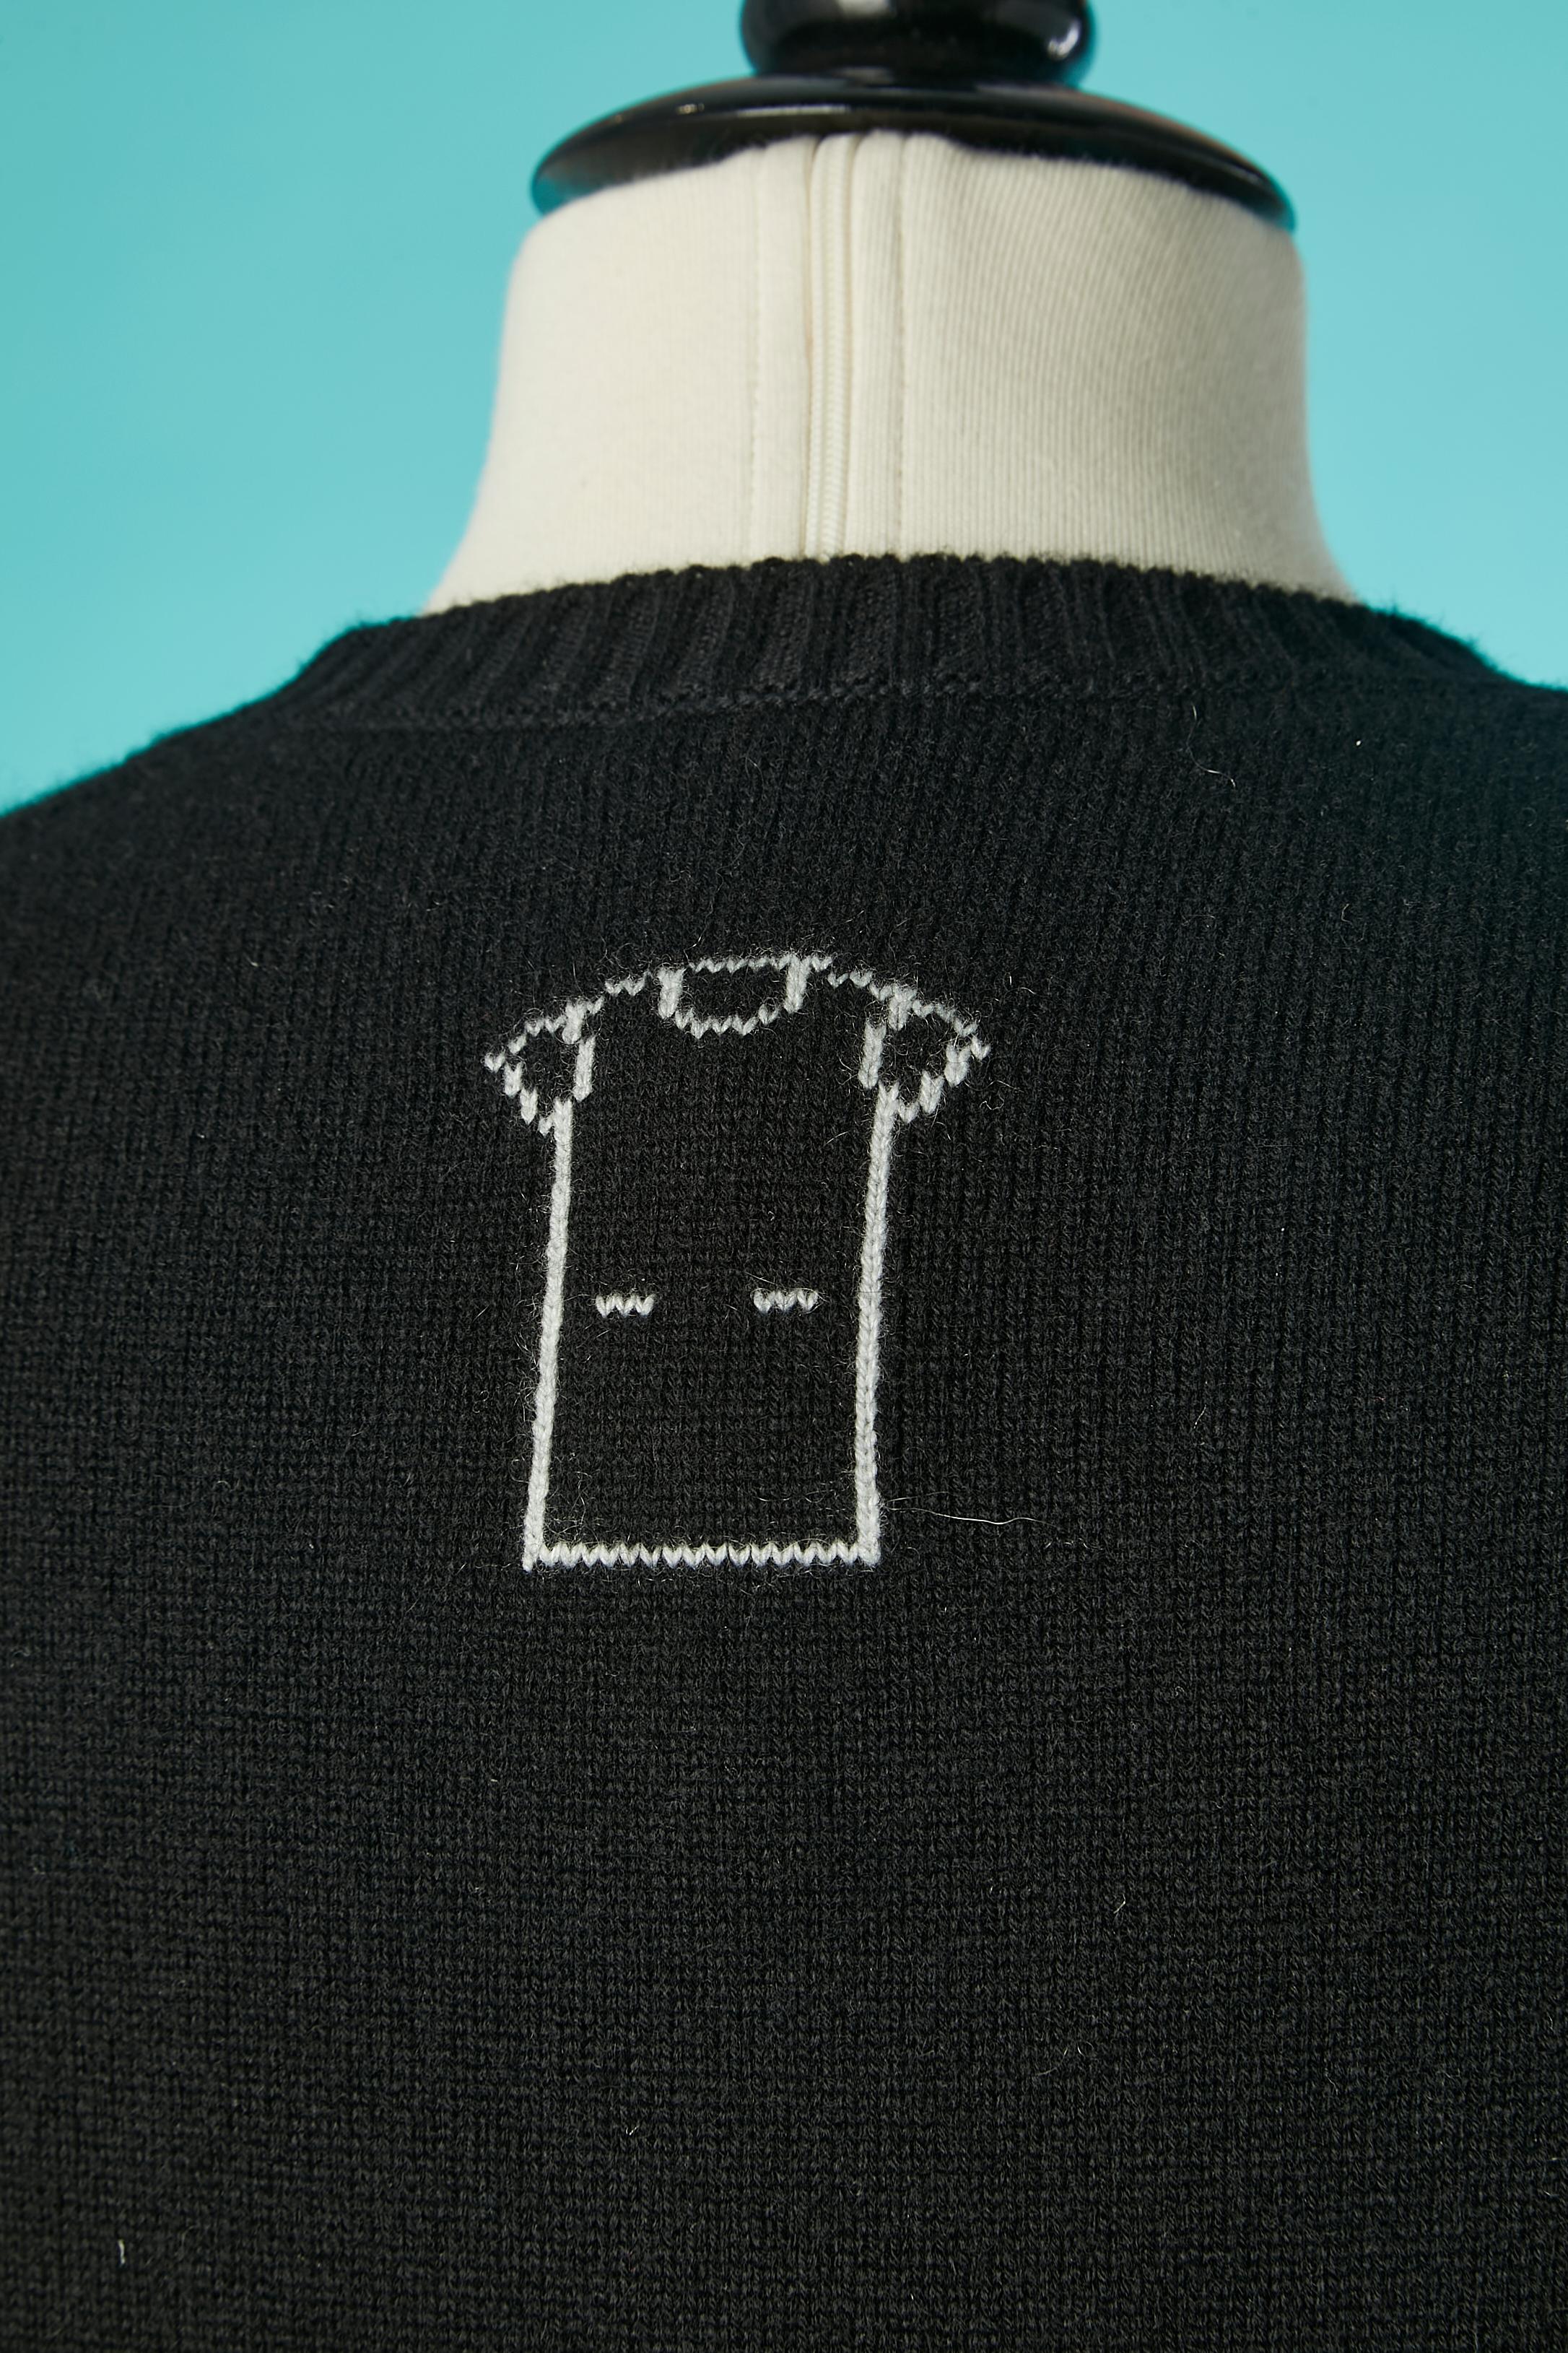 Black cashmere knit dress with short sleeve and embellishment Chanel  For Sale 2